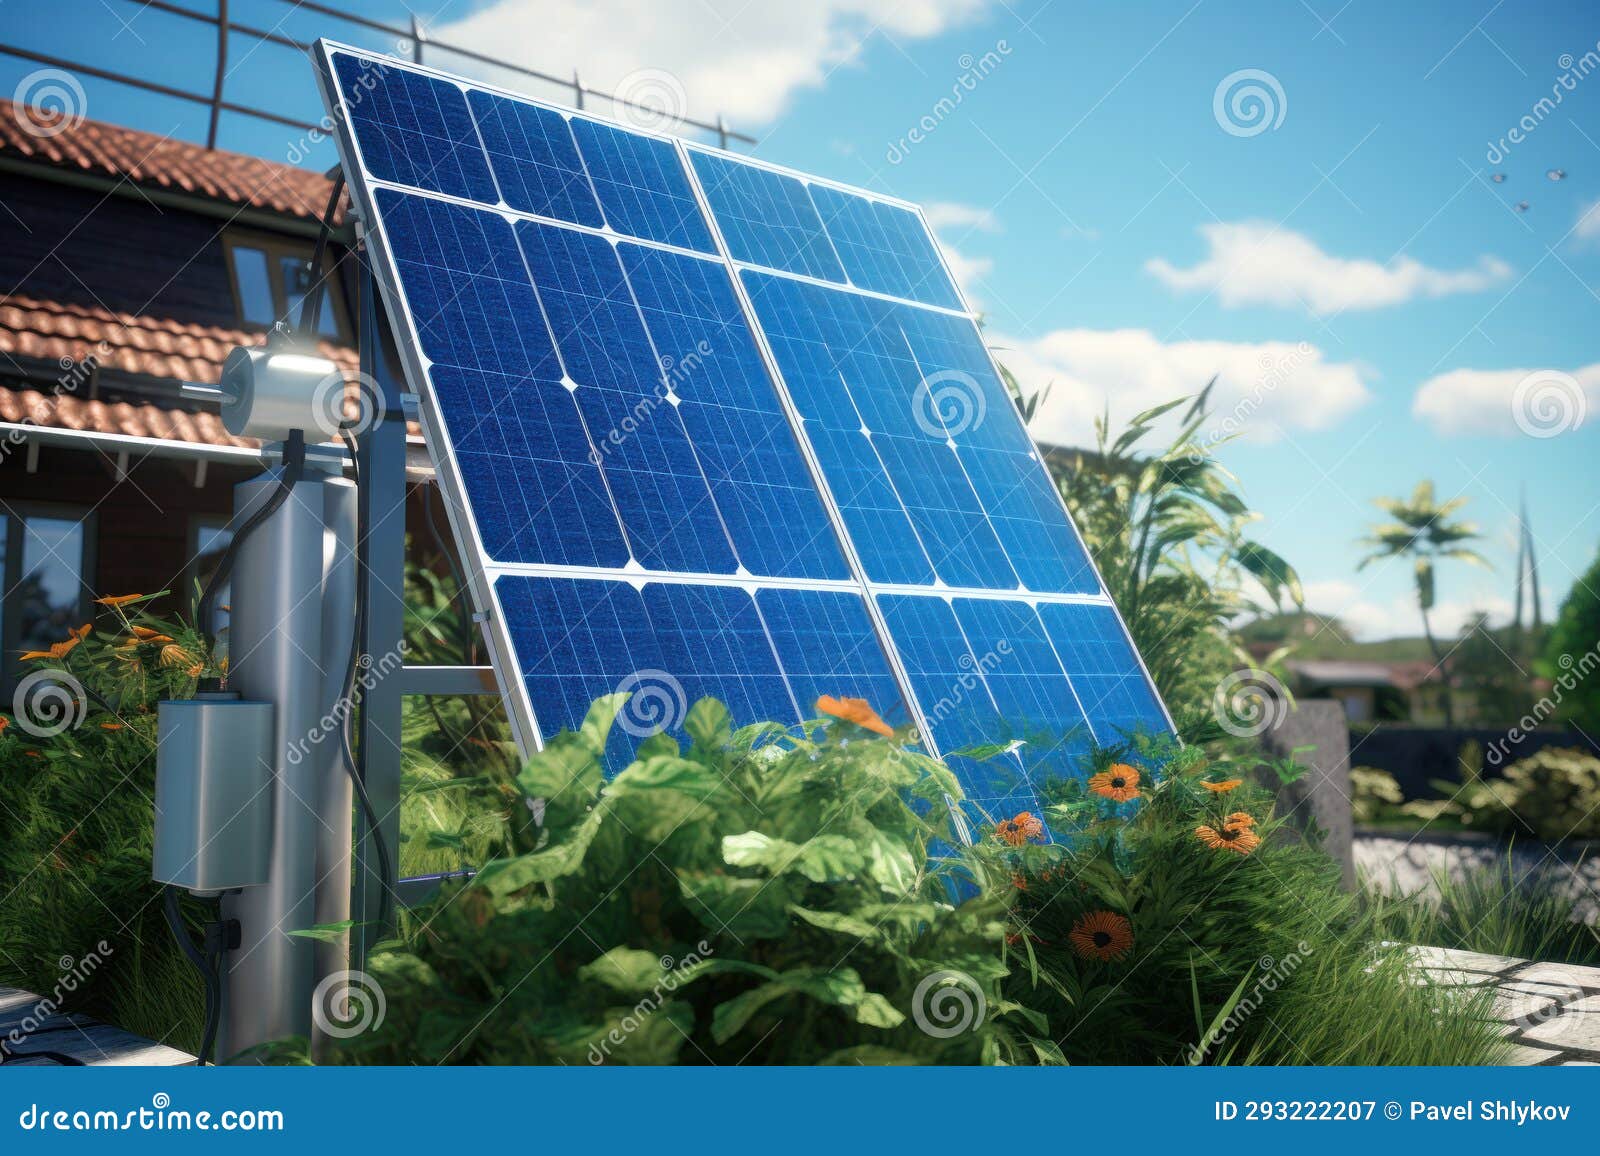 solar photovoltaic panels on house roof